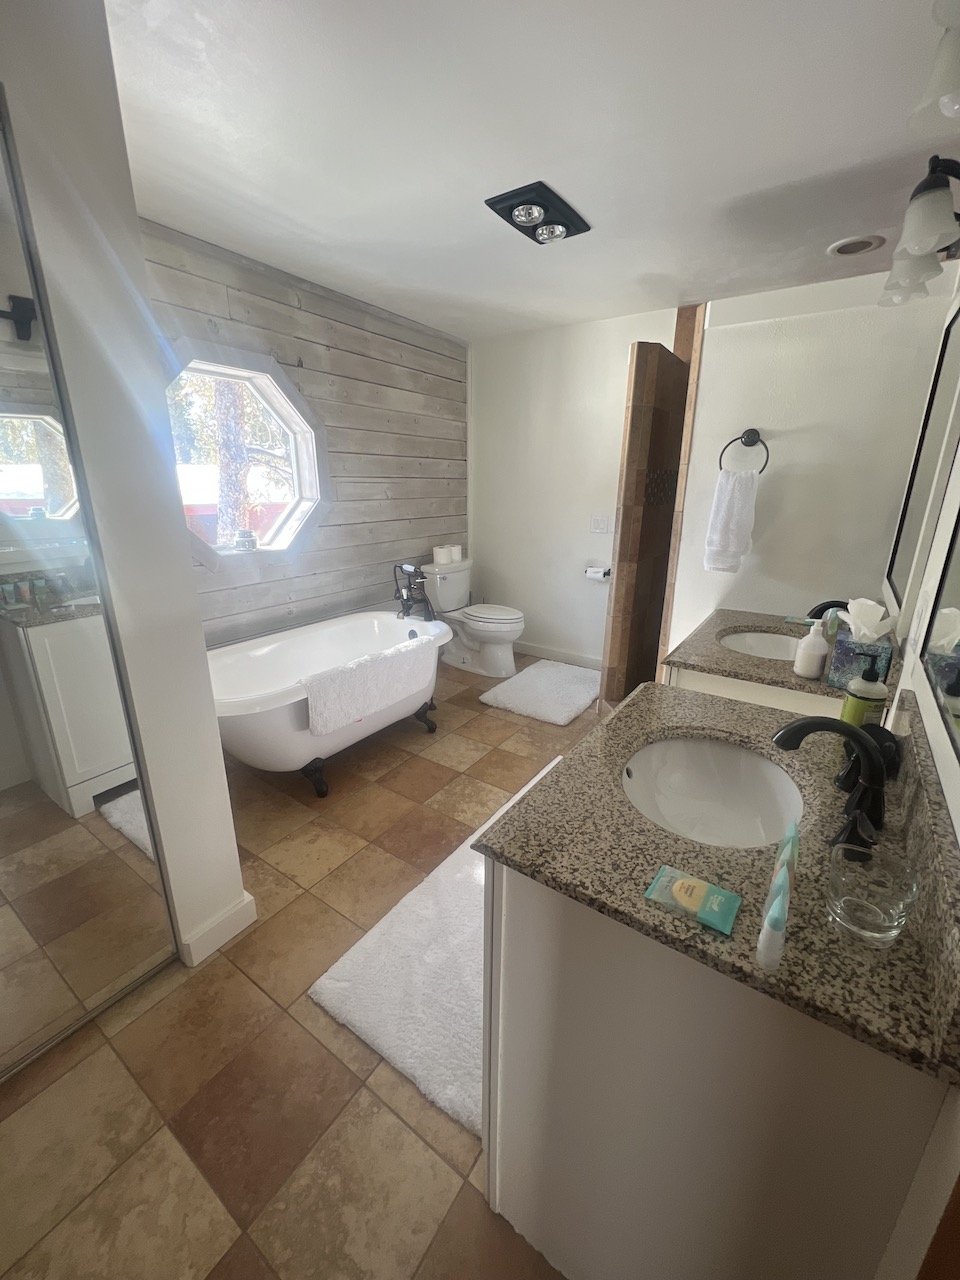 Clean rental property bathroom in mountain house located in Alma, Colorado